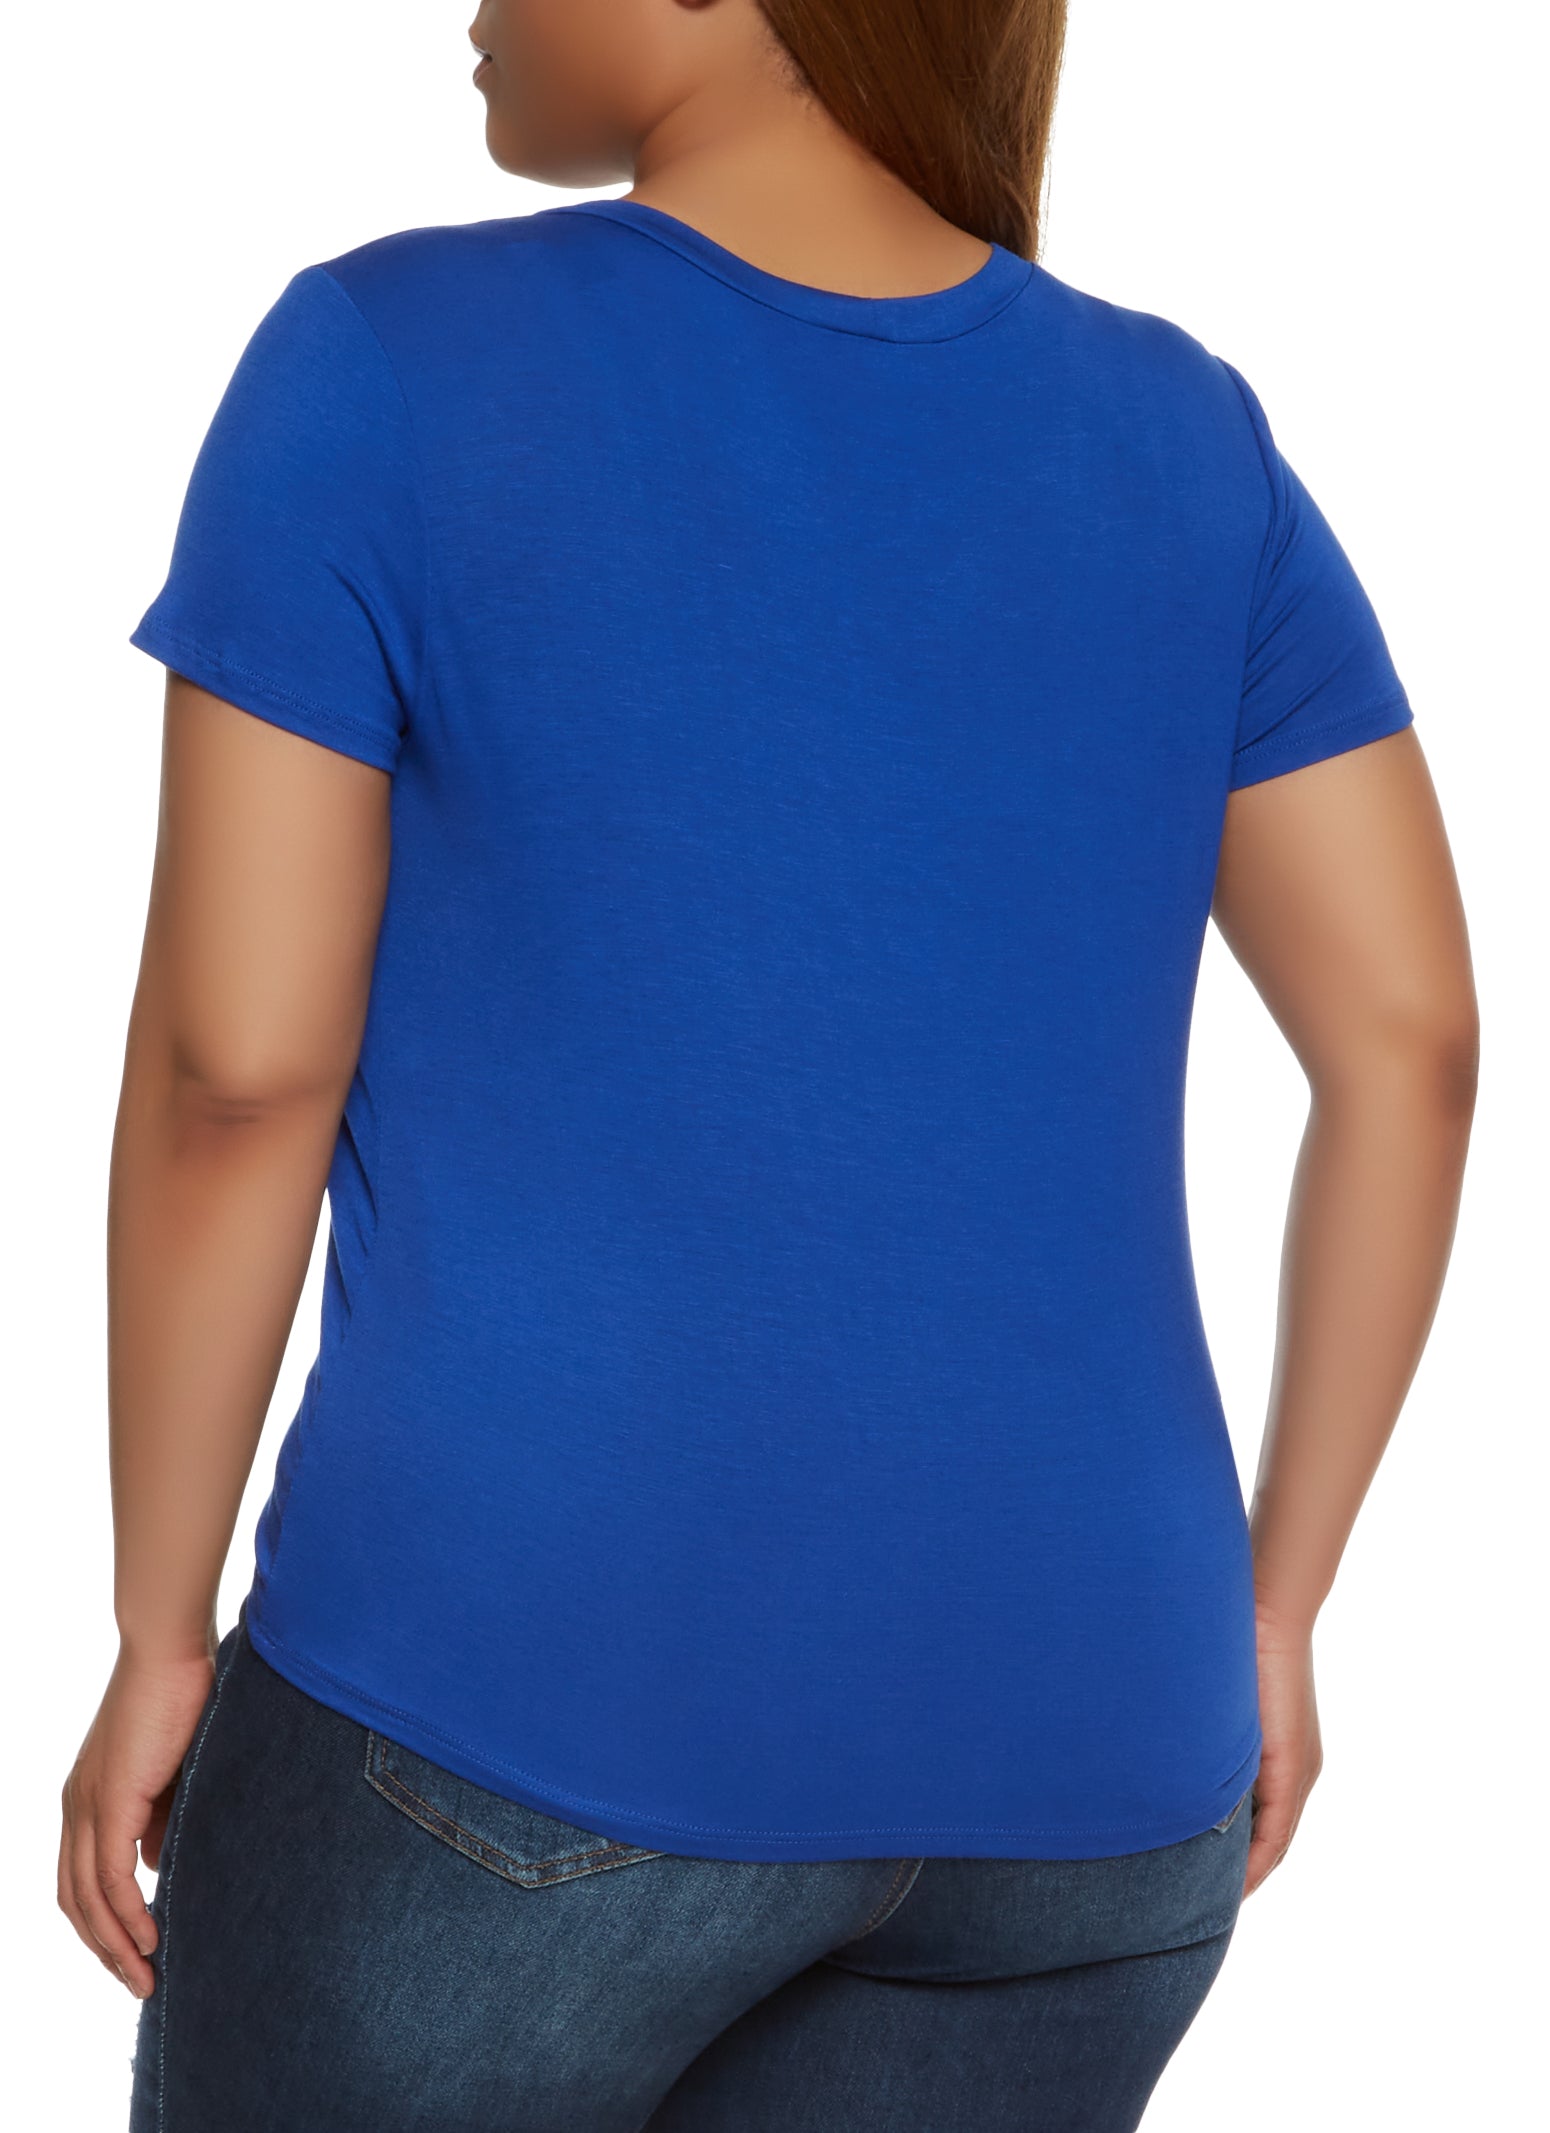 Womens Plus Size Winking Graphic Tee, Royal Blue, Size 2x | Rainbow Shops